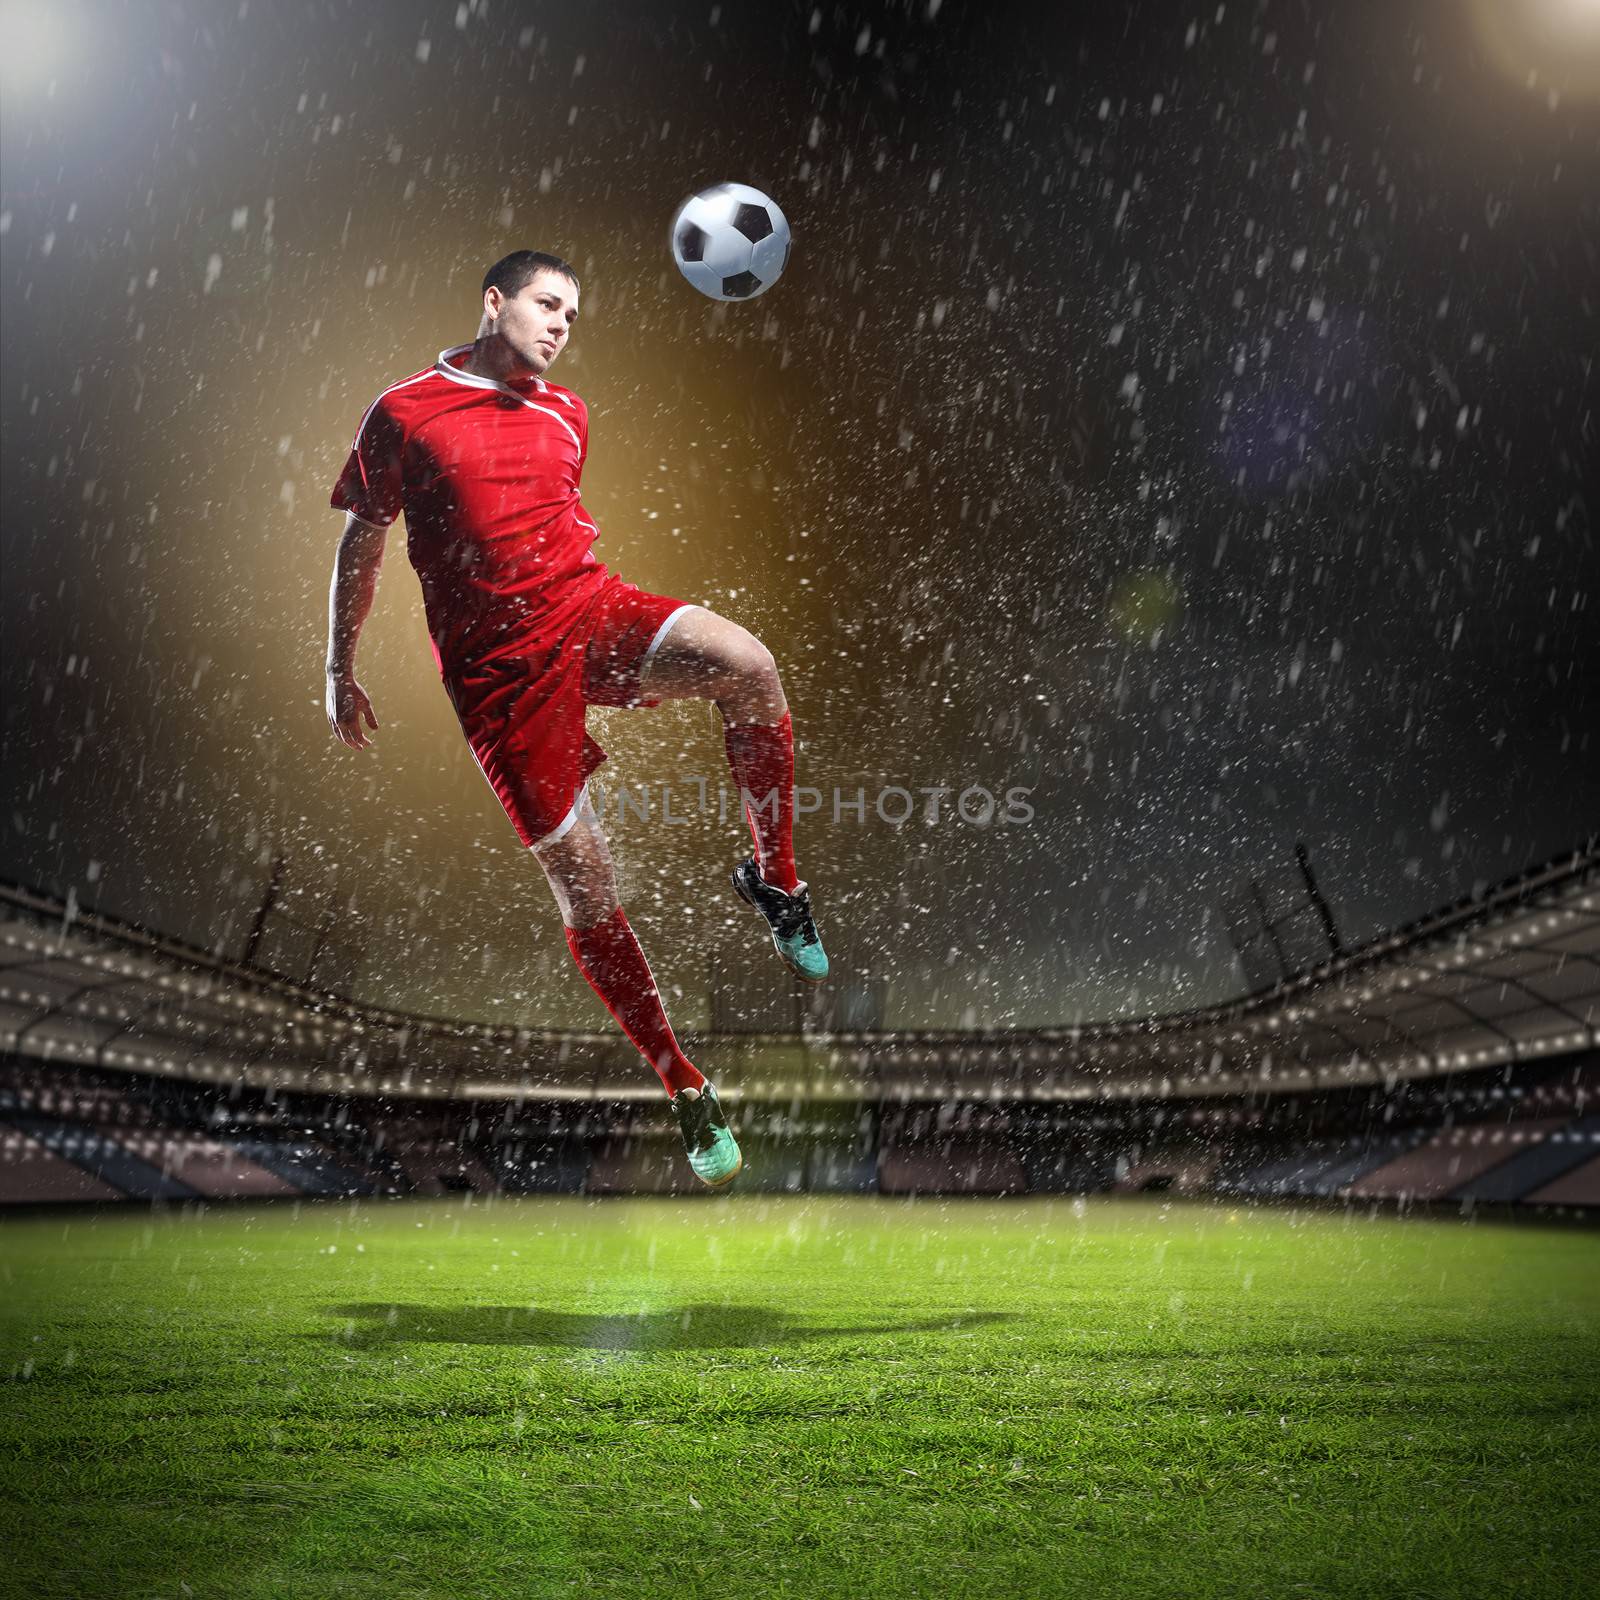 Football player by sergey_nivens